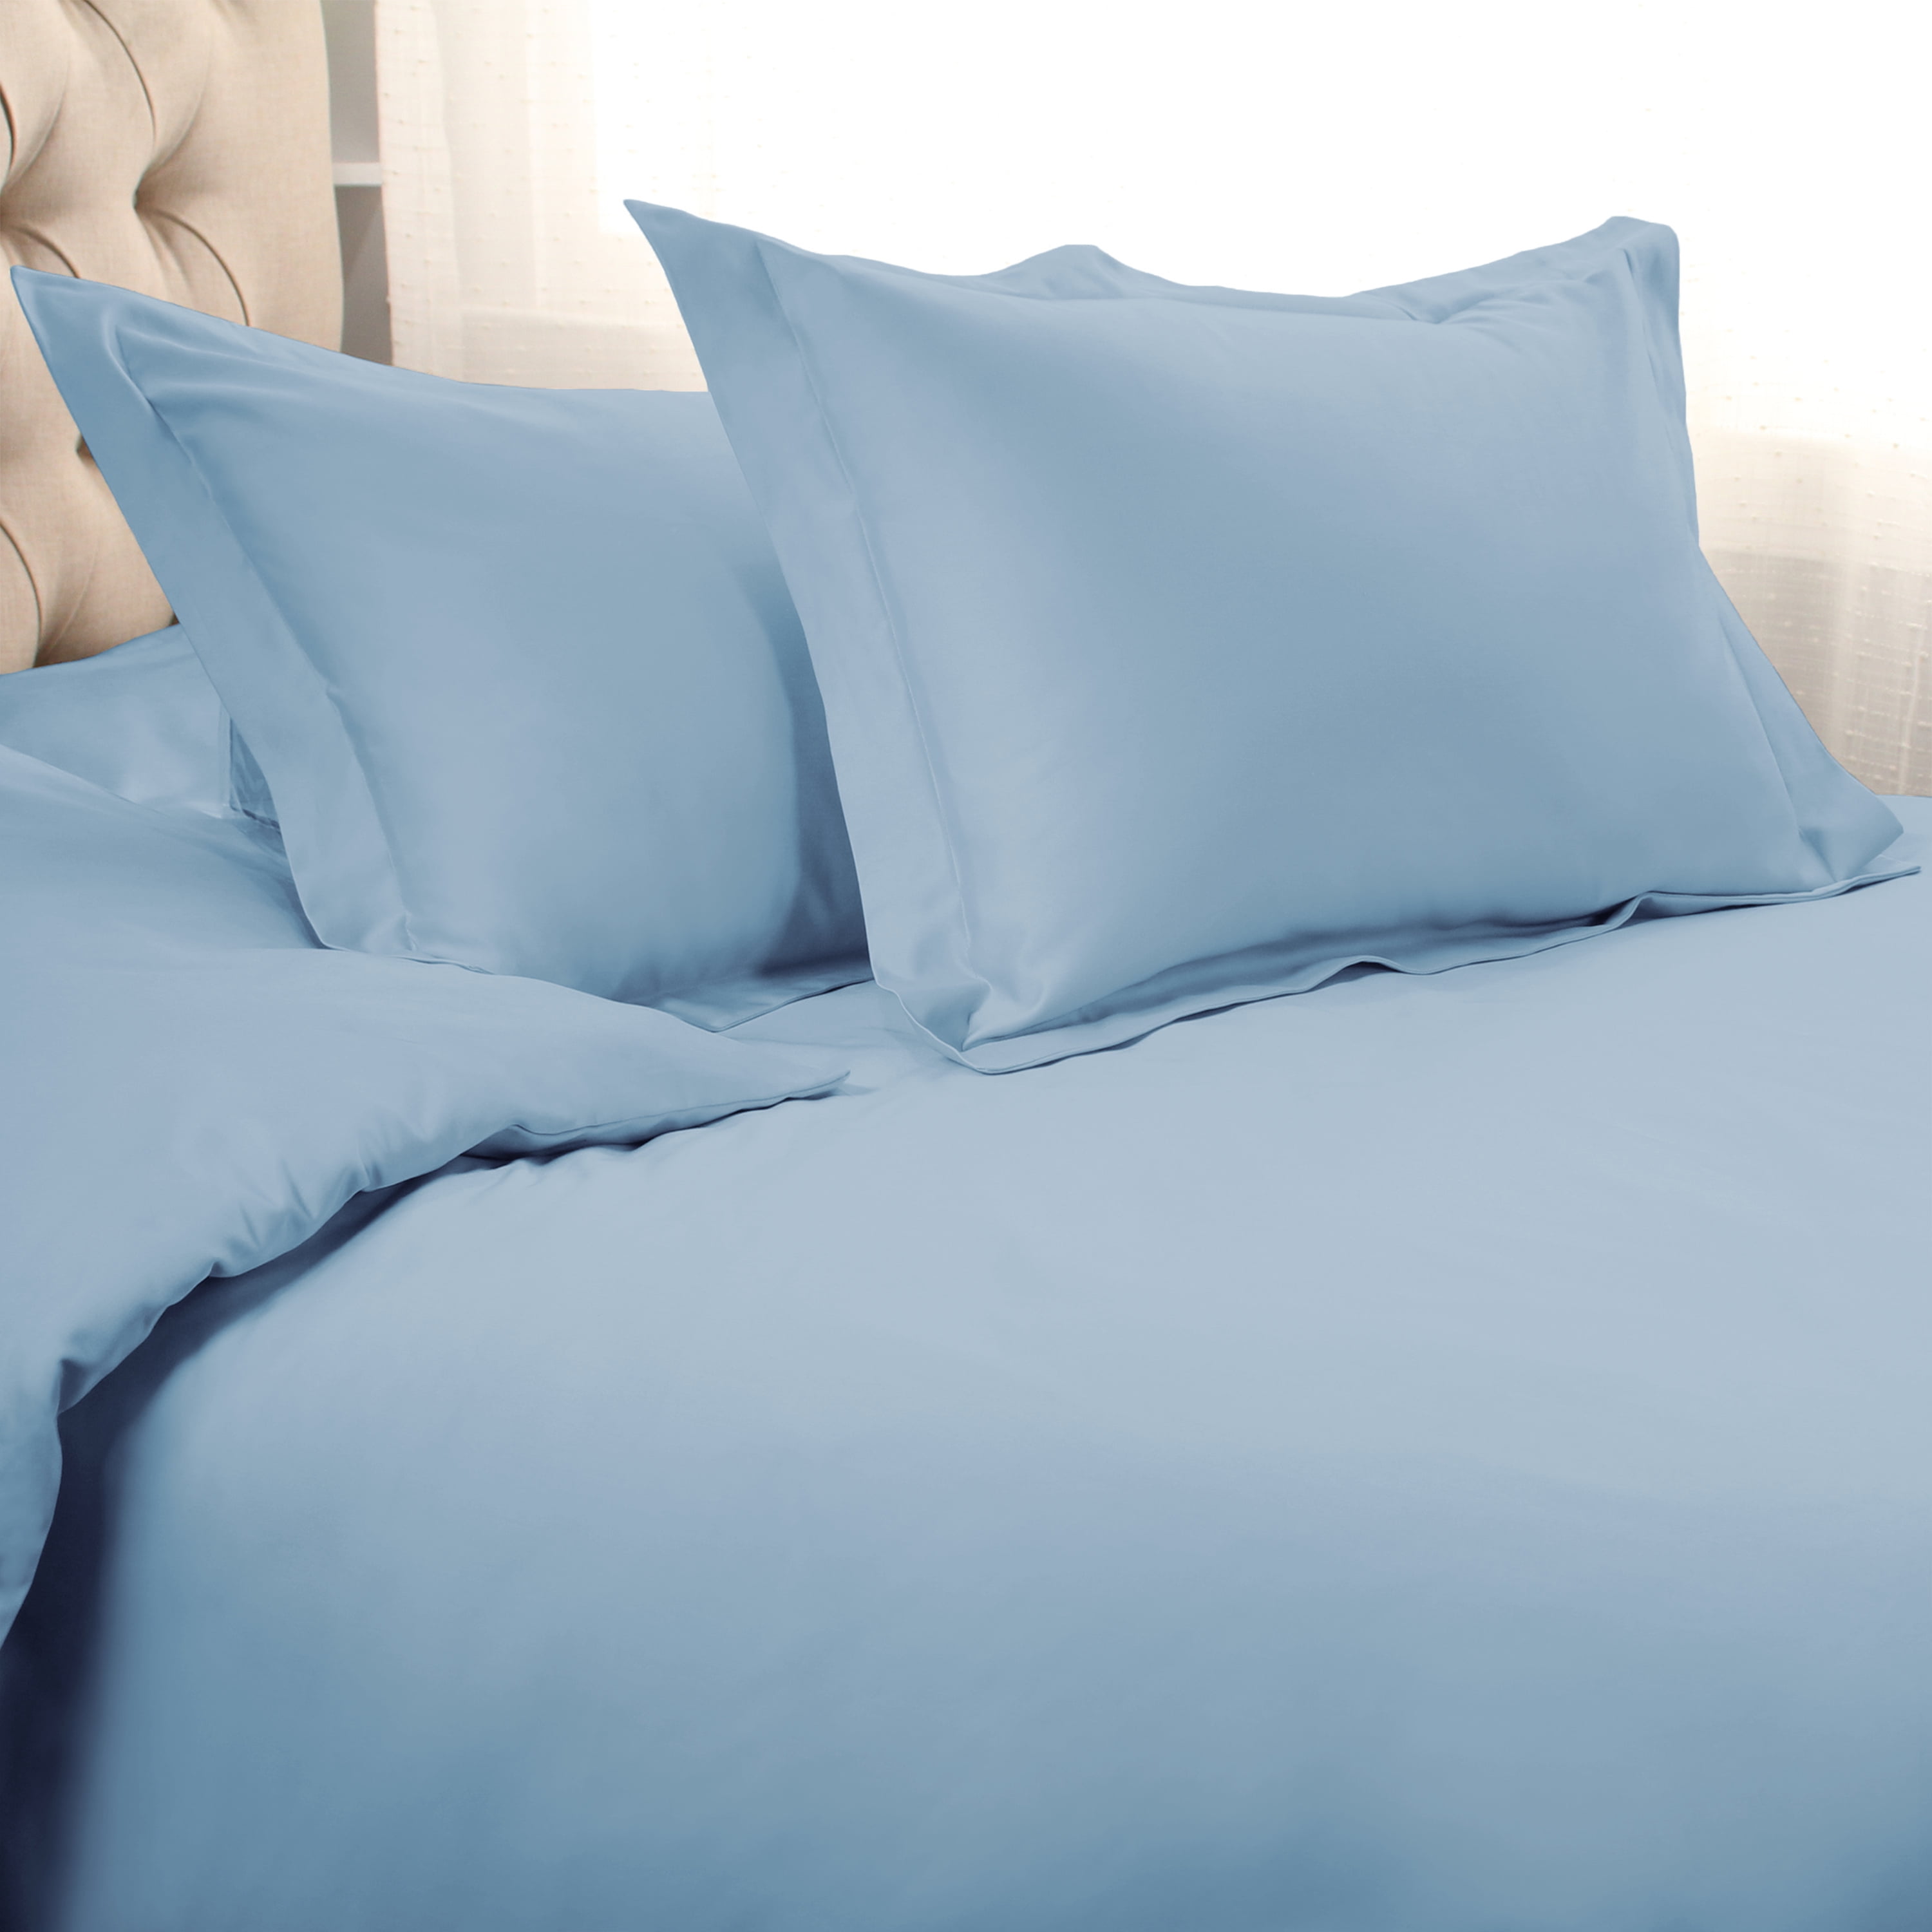 New Brand Luxury Soft Bedding Collection Blue Solid 1000 TC 100%Egyptian Cotton 